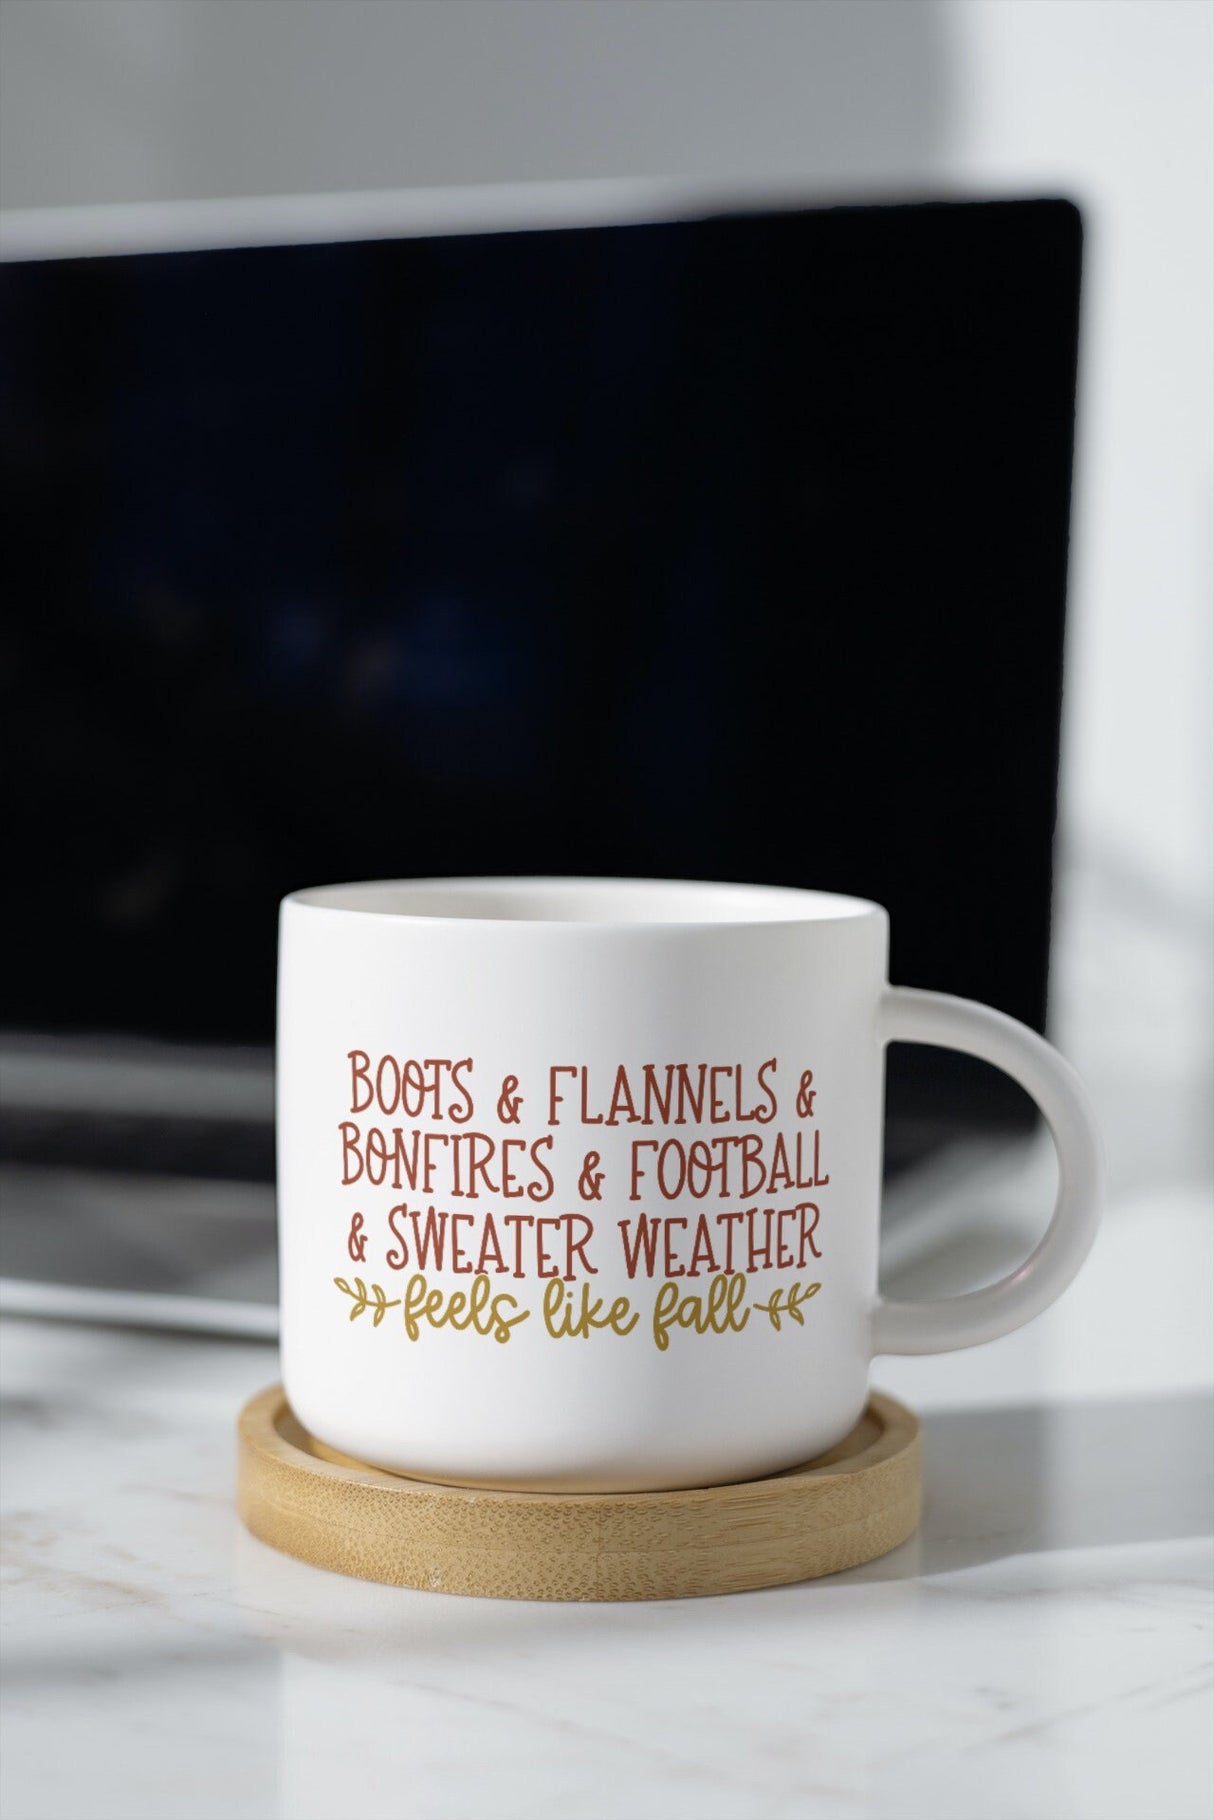 Boots Flannel Bonfires Football Sweater Weather SVG Cut File